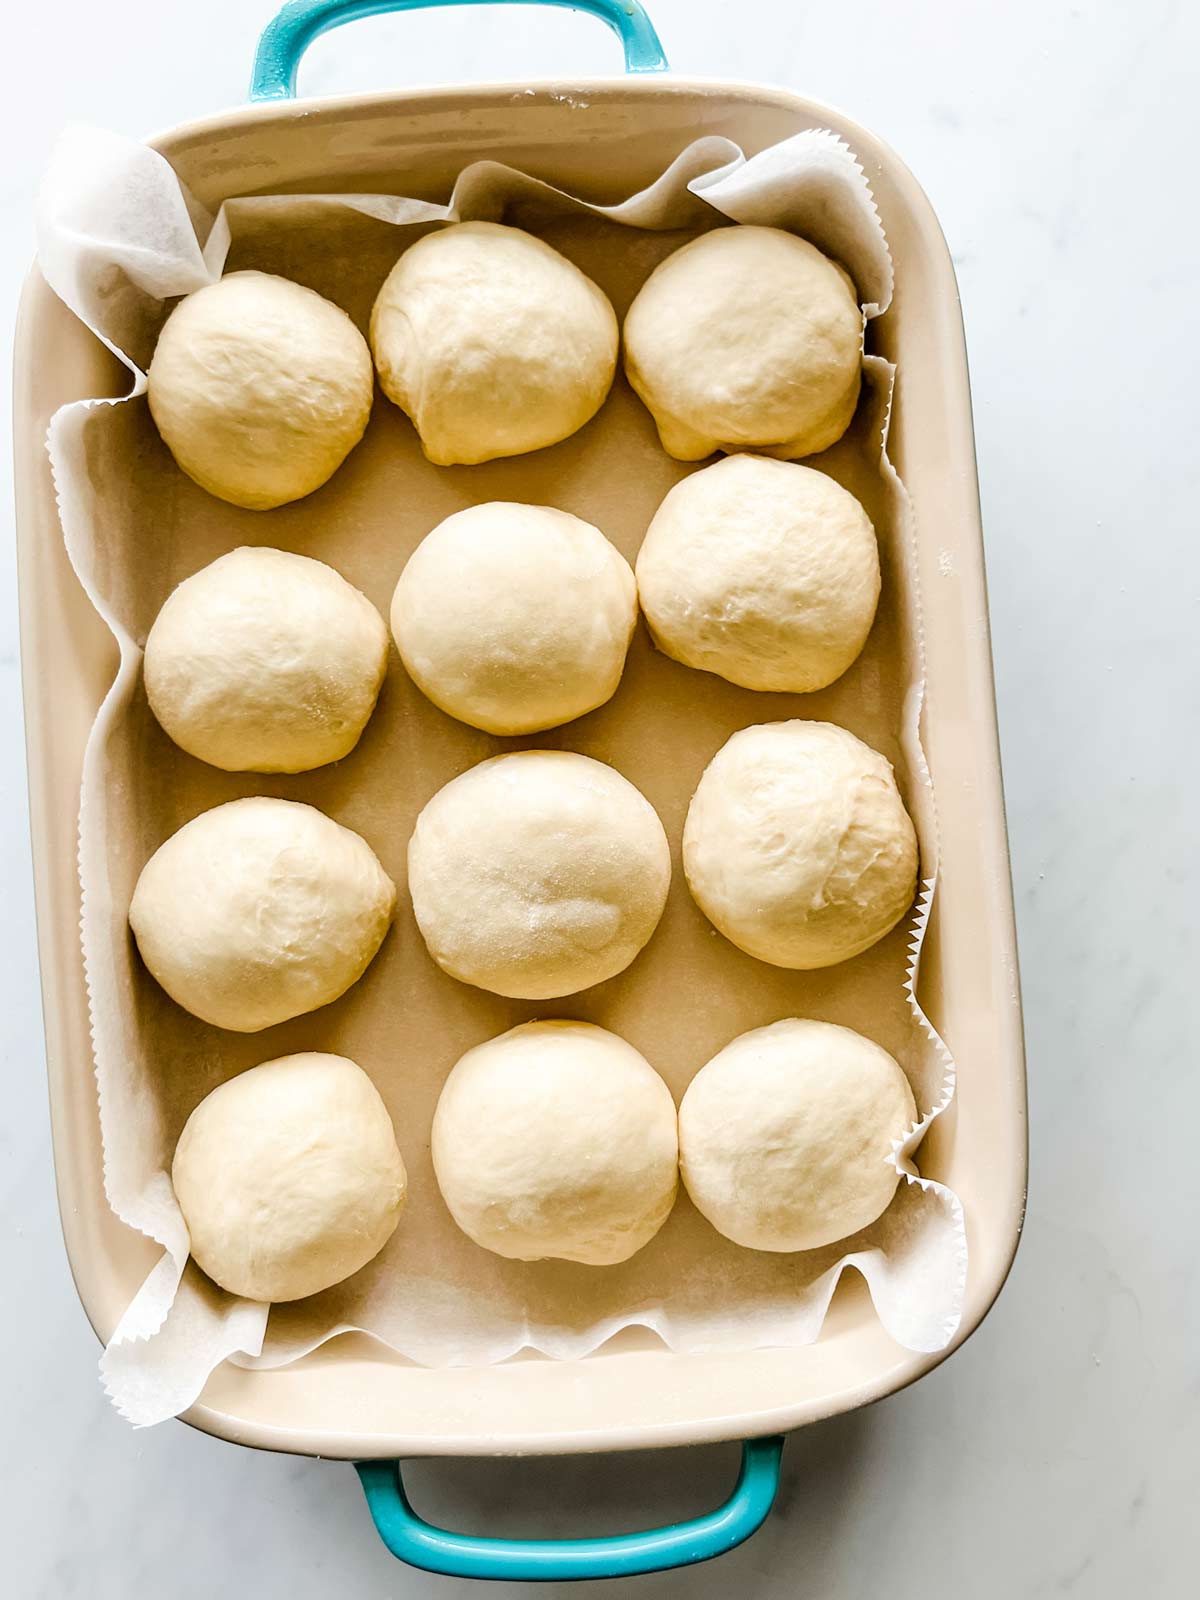 Dinner rolls in a baking pan ready to rise.